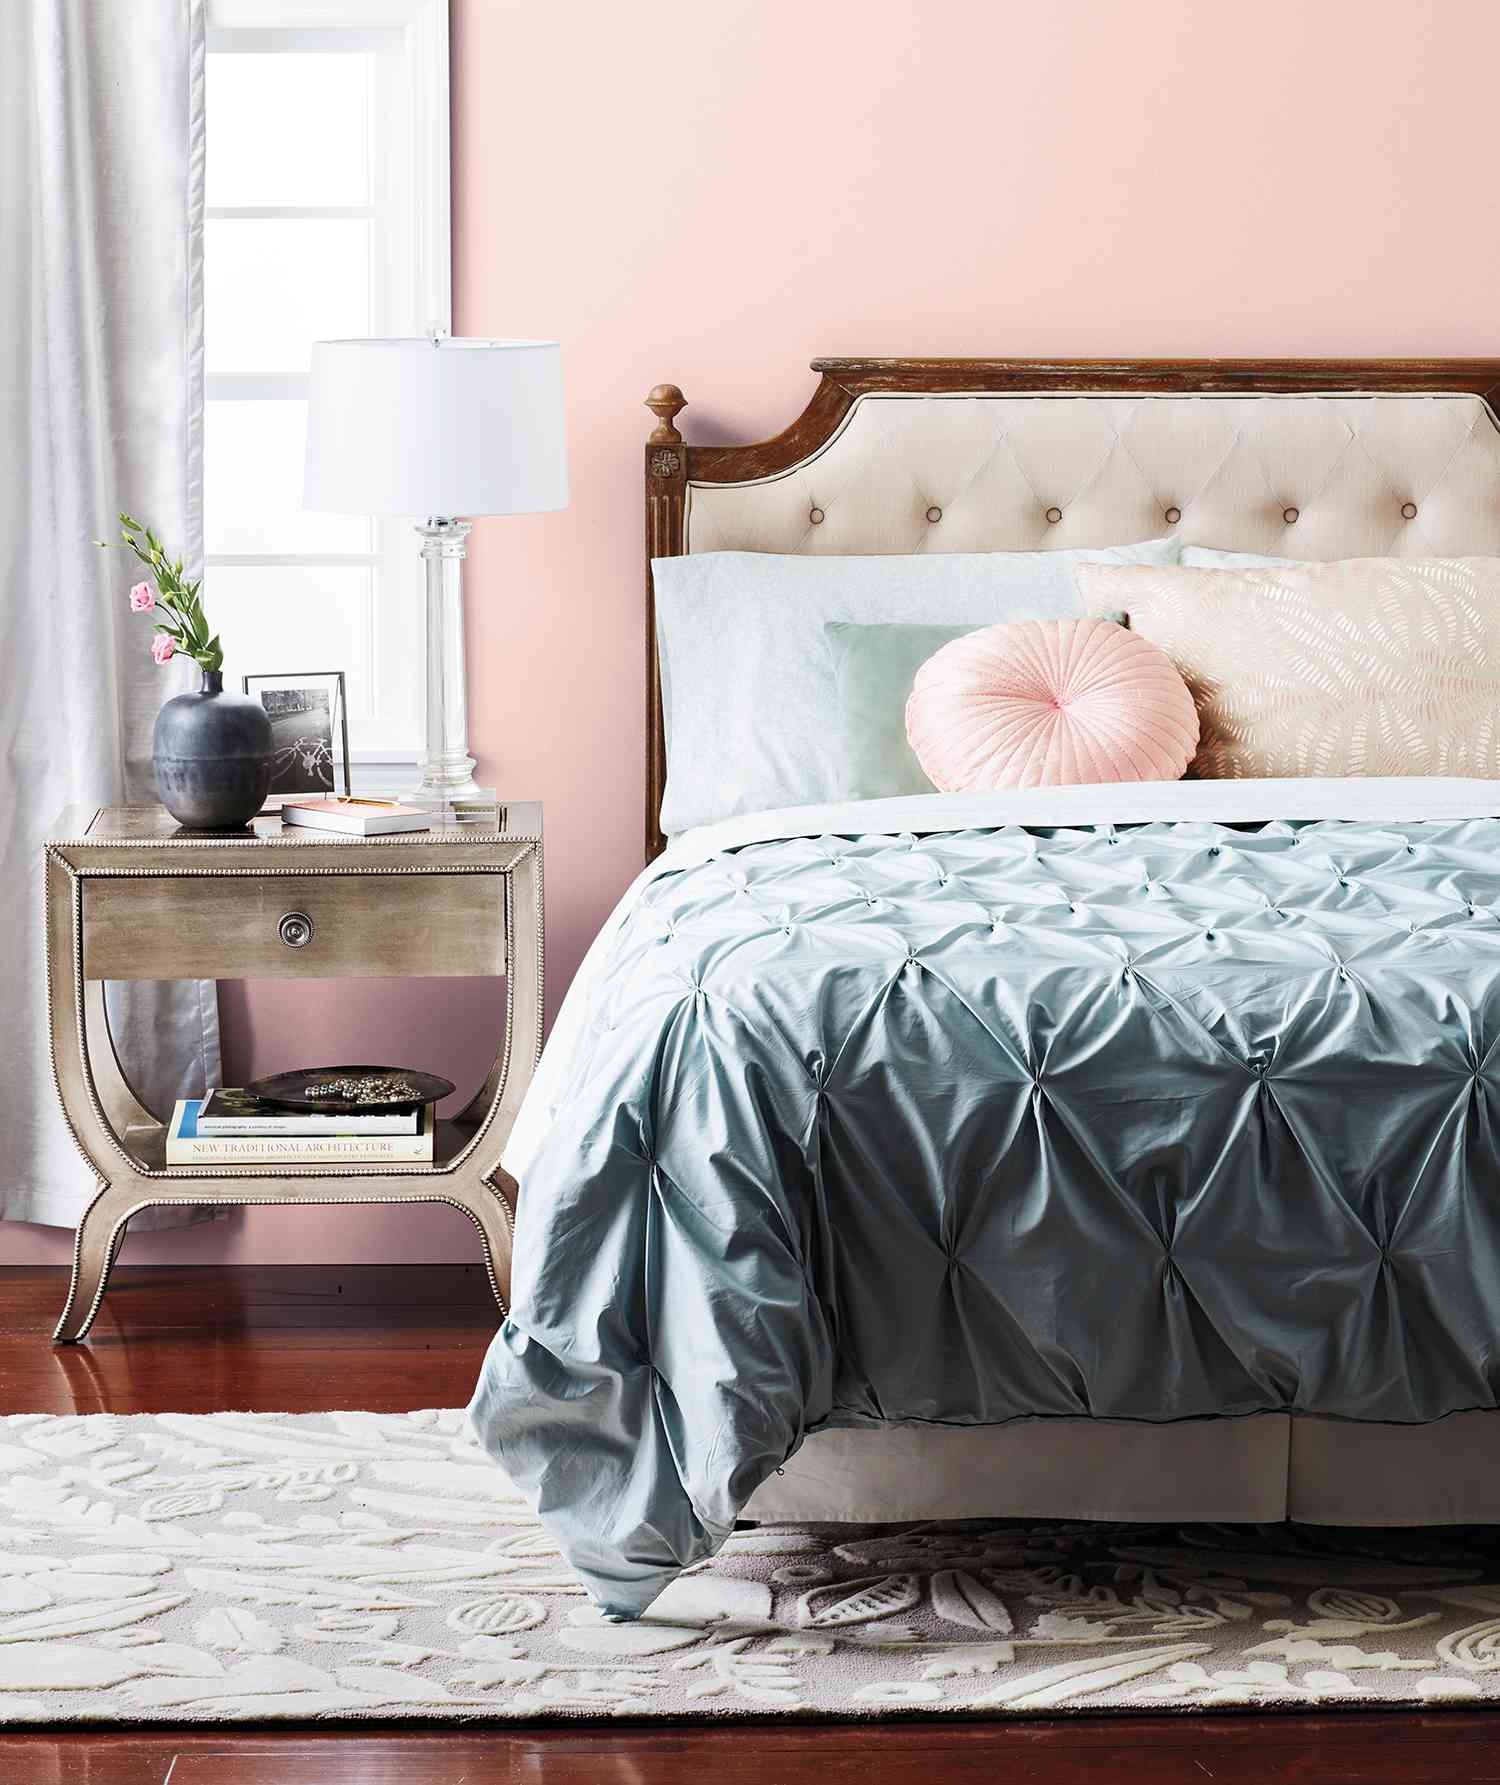 Bedroom with romantic elements. pinks, blues